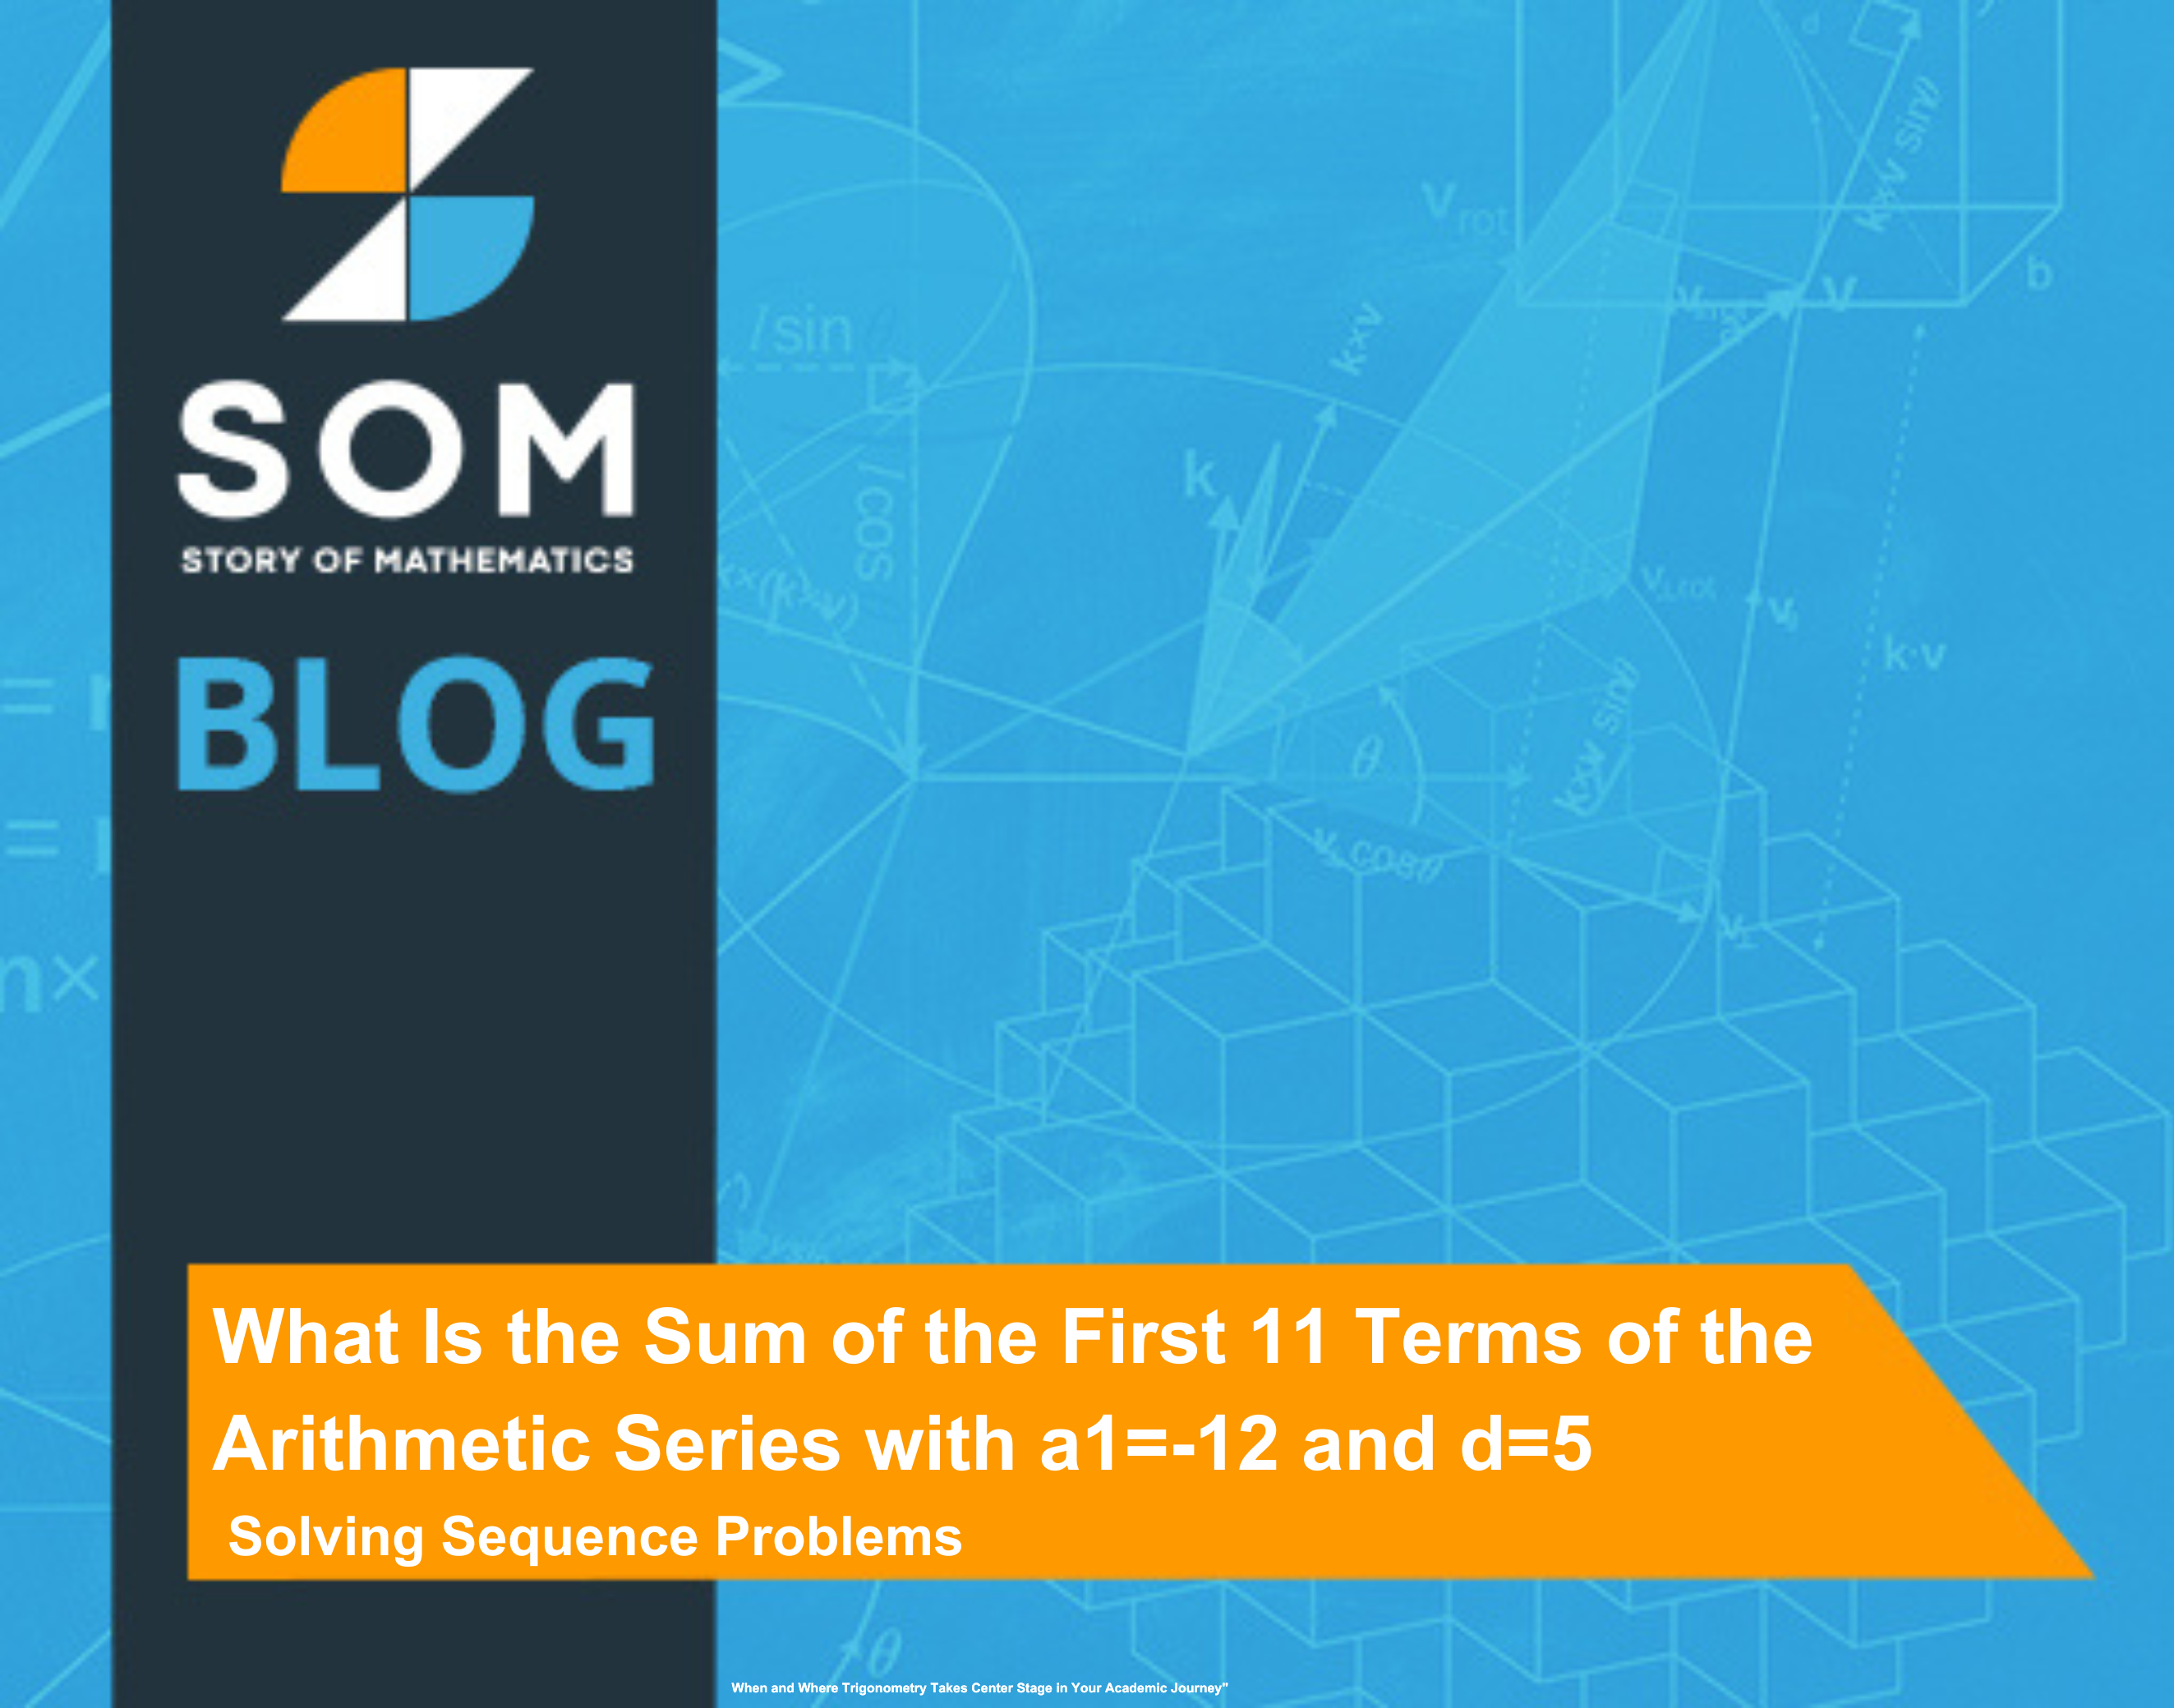 Feature Image What Is the Sum of the First 11 Terms of the Arithmetic Series with a1=-12 and d=5 Solving Sequence Problems